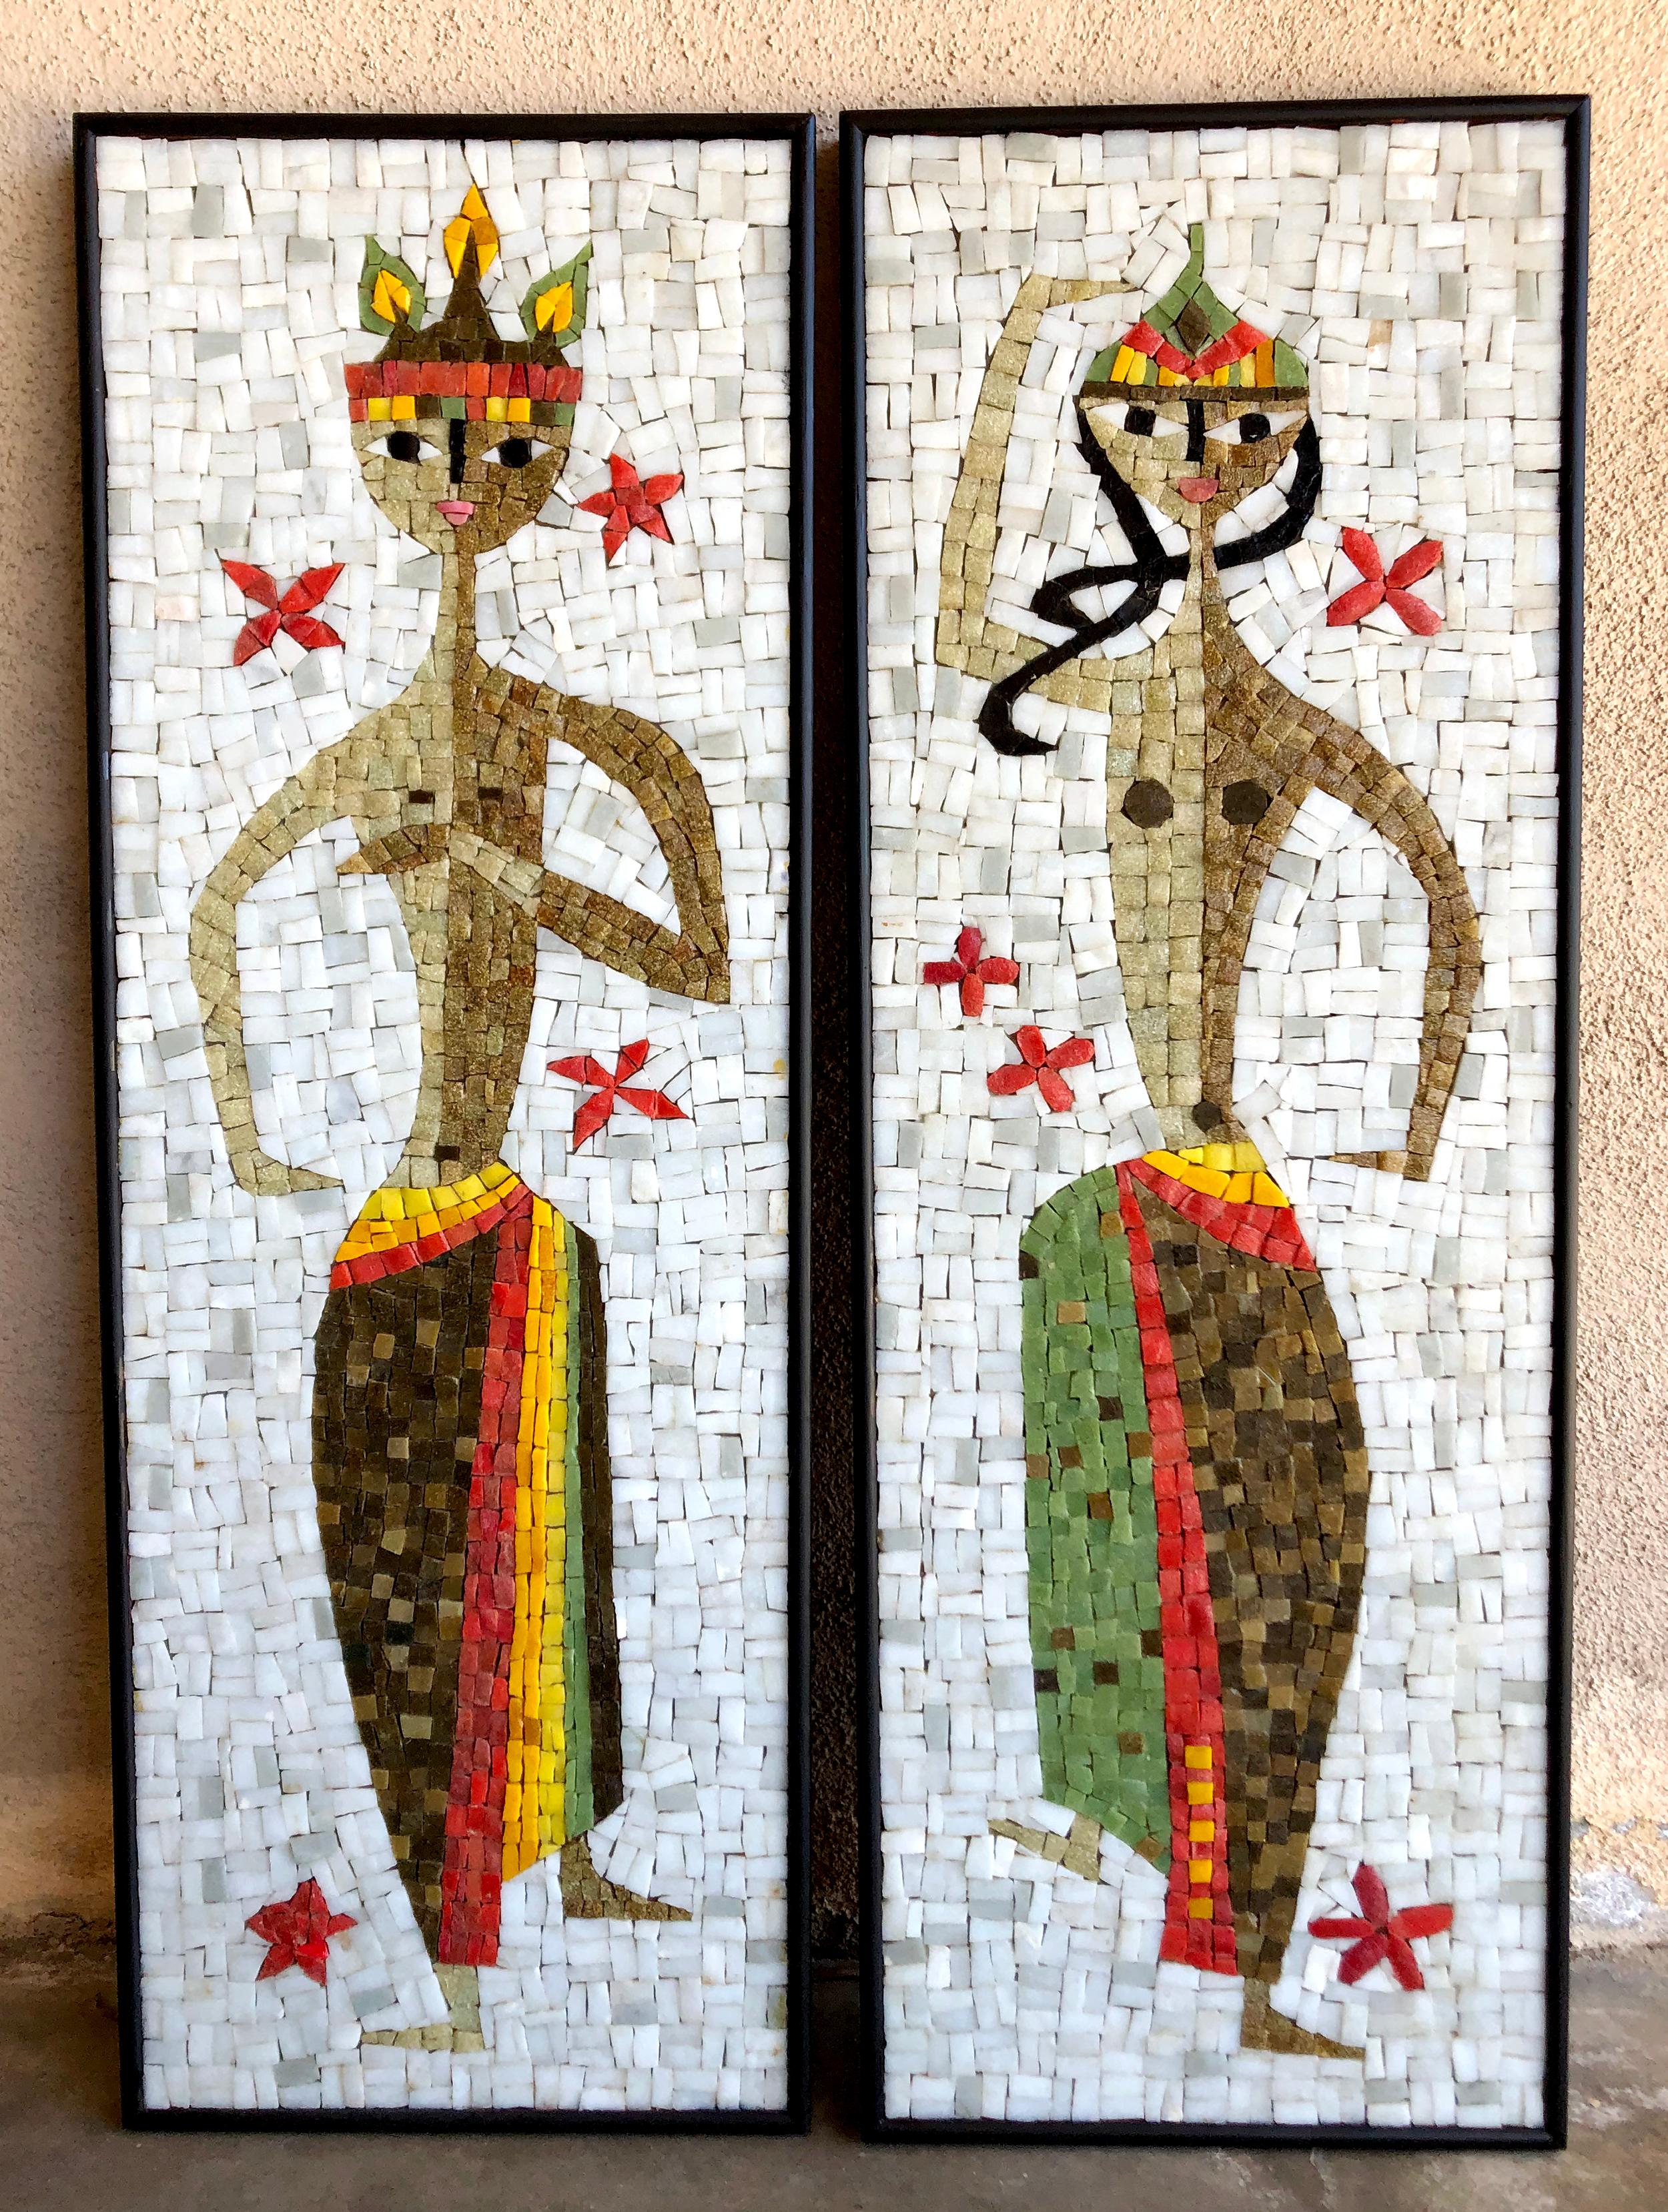 American Jerome and Evelyn Ackerman Pair of Balinese Dancer Glass Tile Mosaic Wall Panels